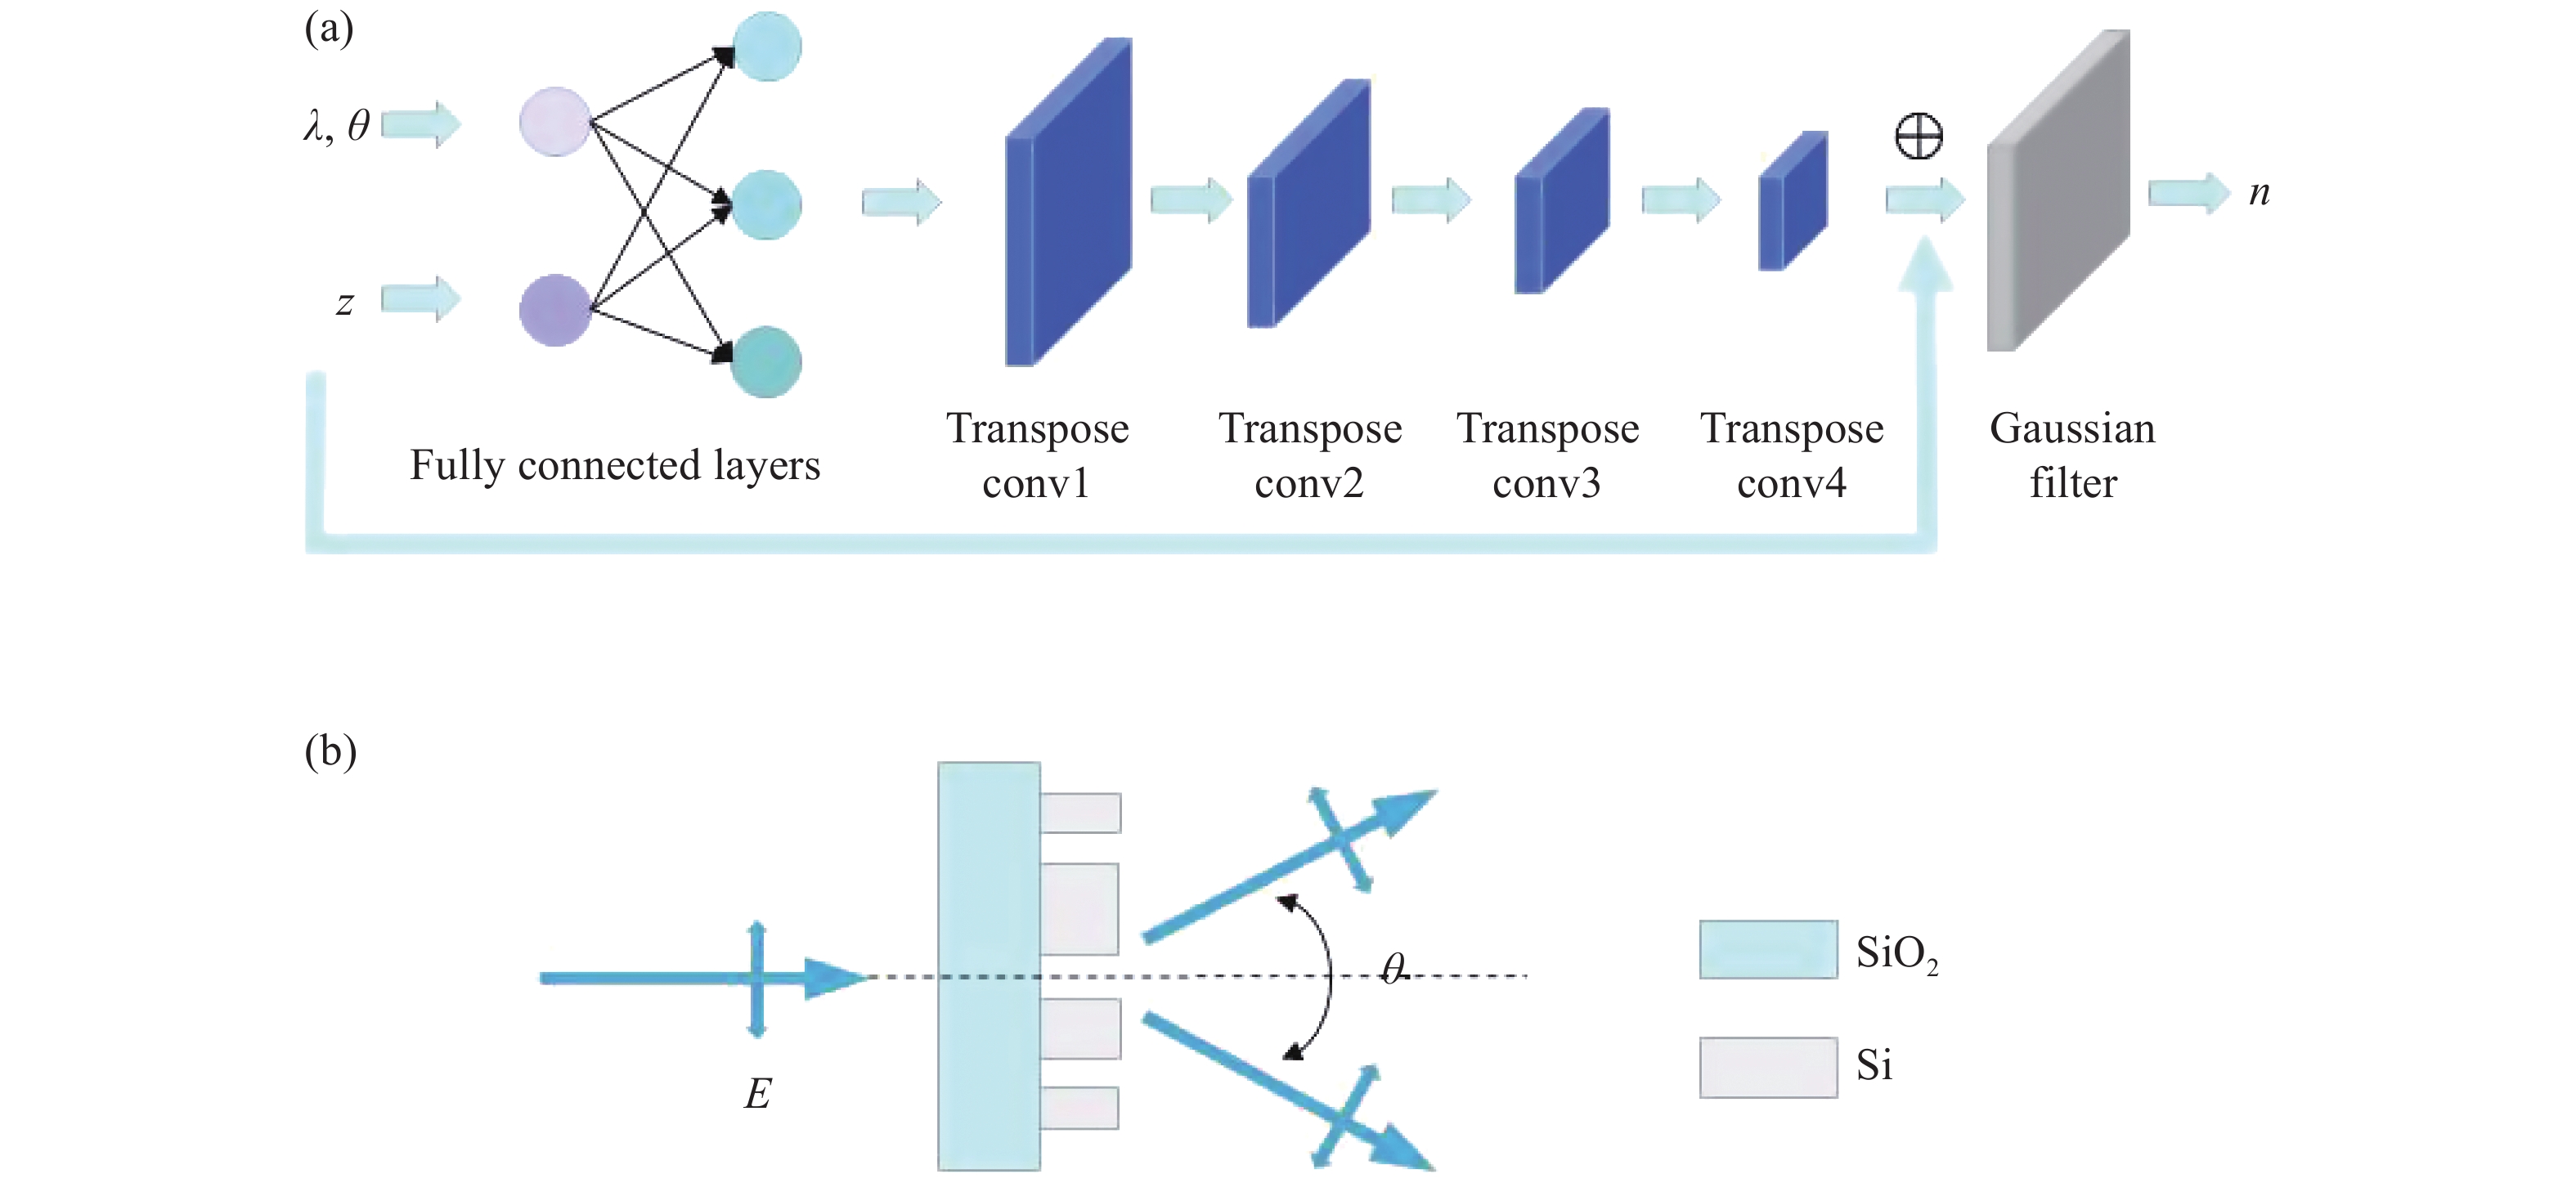 (a) Schematic diagram of deep learning model; (b) Schematic diagram of metagrating beam splitter